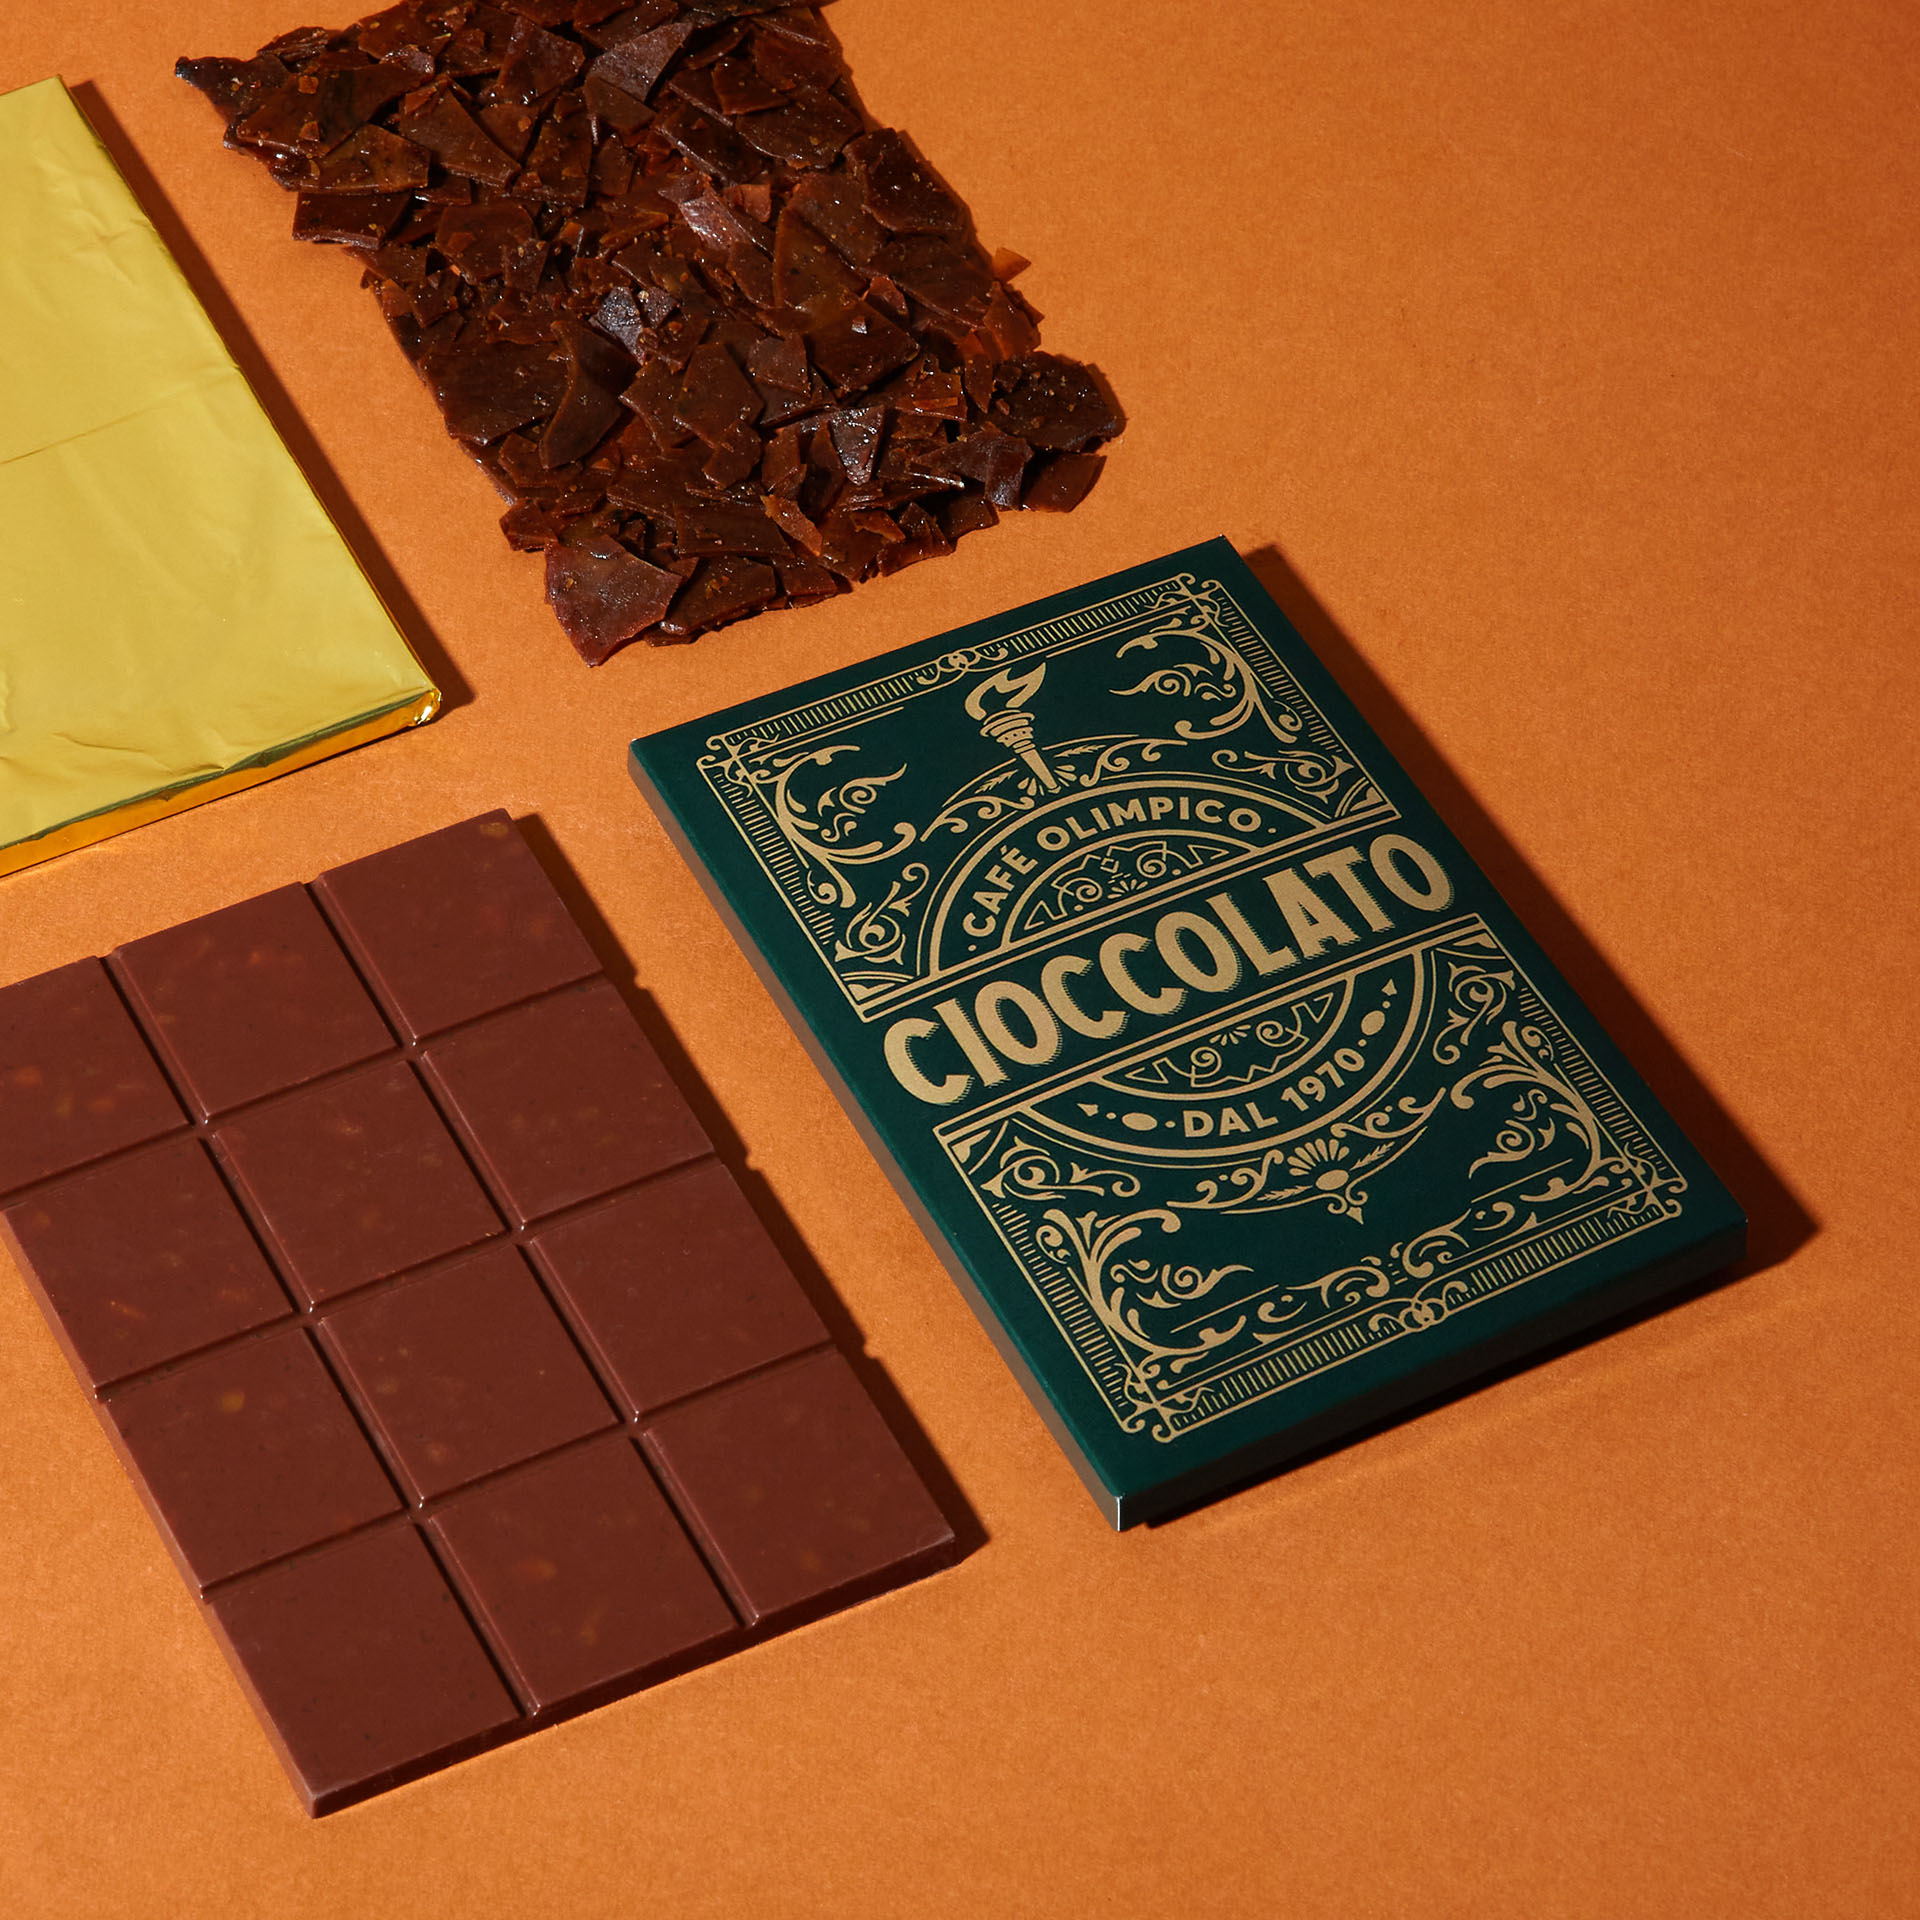 Crafting Heritage Packaging Design for Café Olimpico & État de Choc’s Italian Chocolate by stnmtl